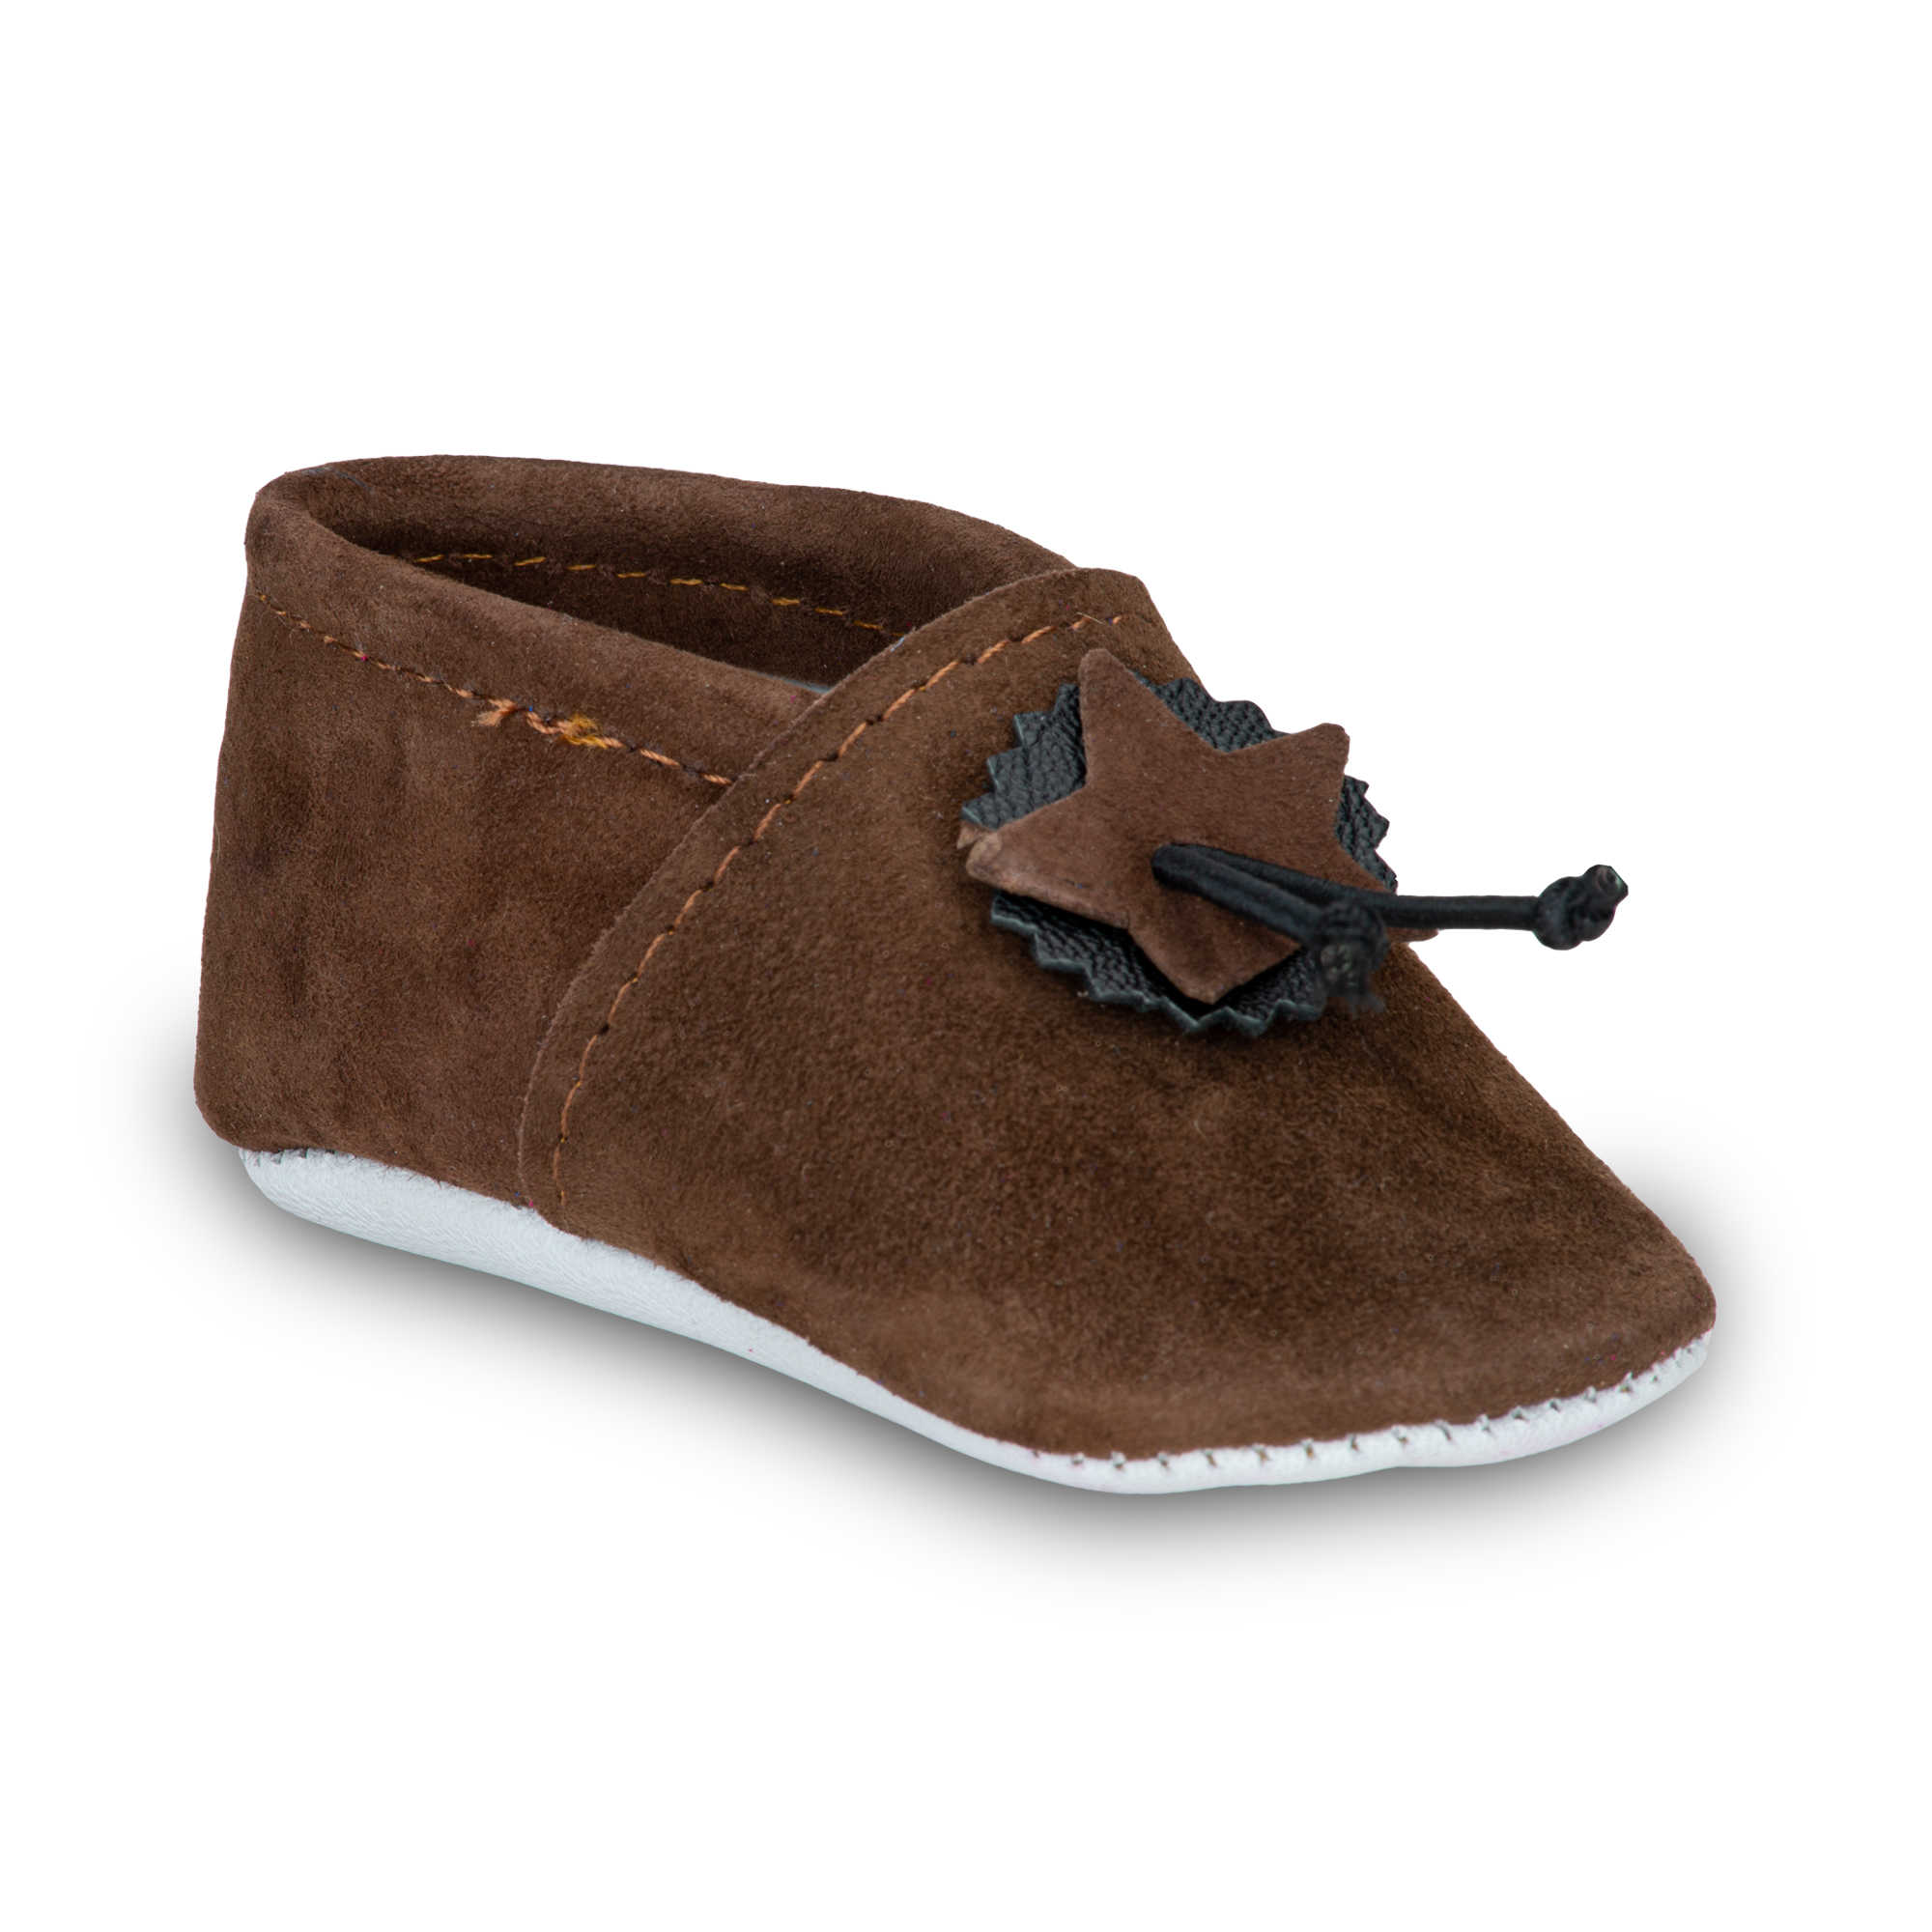 Chaussons souples bebe marron taille 20